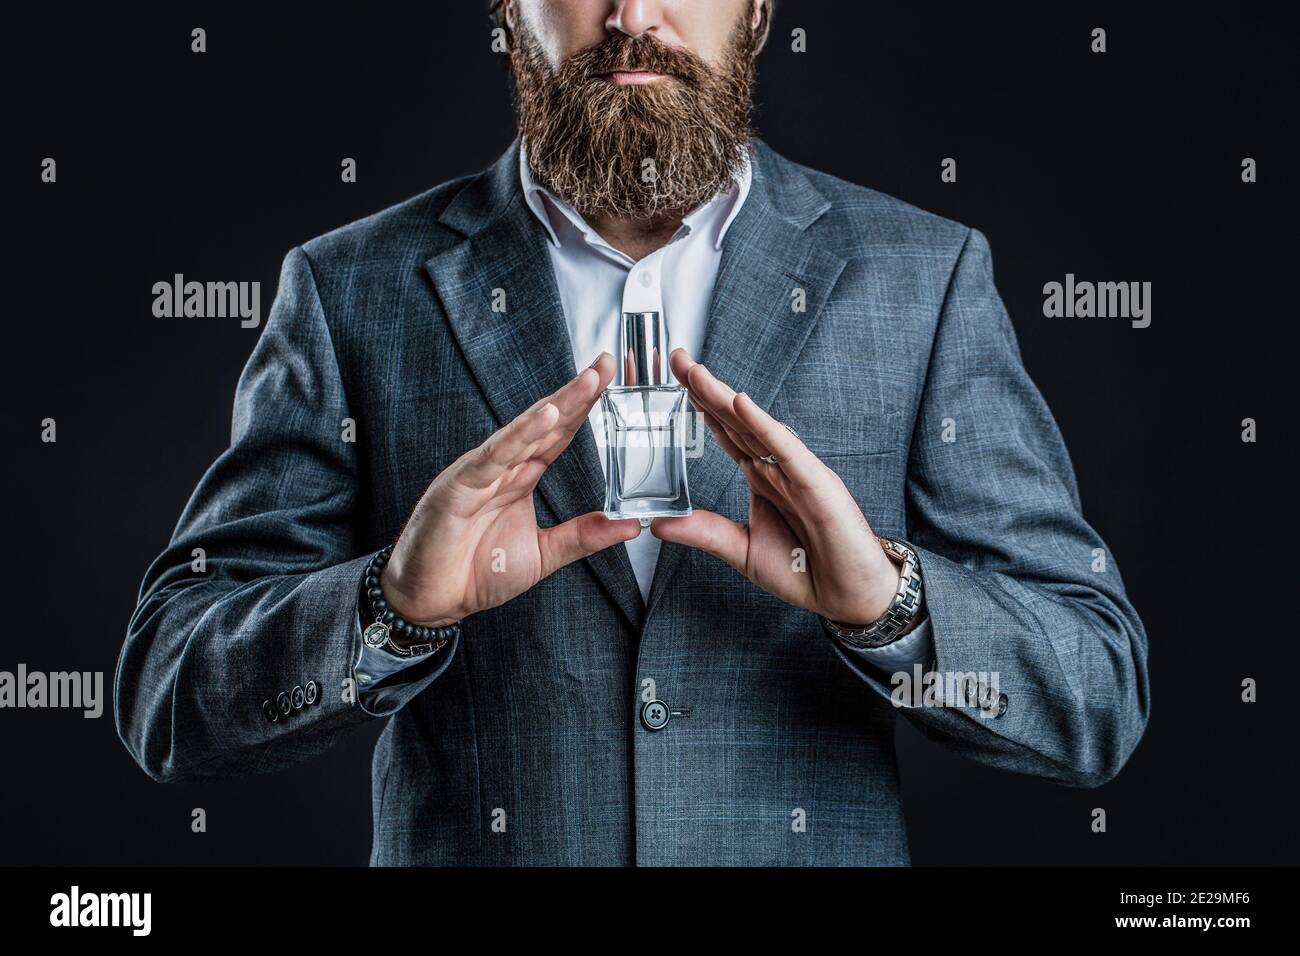 https://c8.alamy.com/comp/2E29MF6/male-holding-up-bottle-of-perfume-man-perfume-fragrance-perfume-or-cologne-bottle-and-perfumery-cosmetics-scent-cologne-bottle-male-holding-2E29MF6.jpg